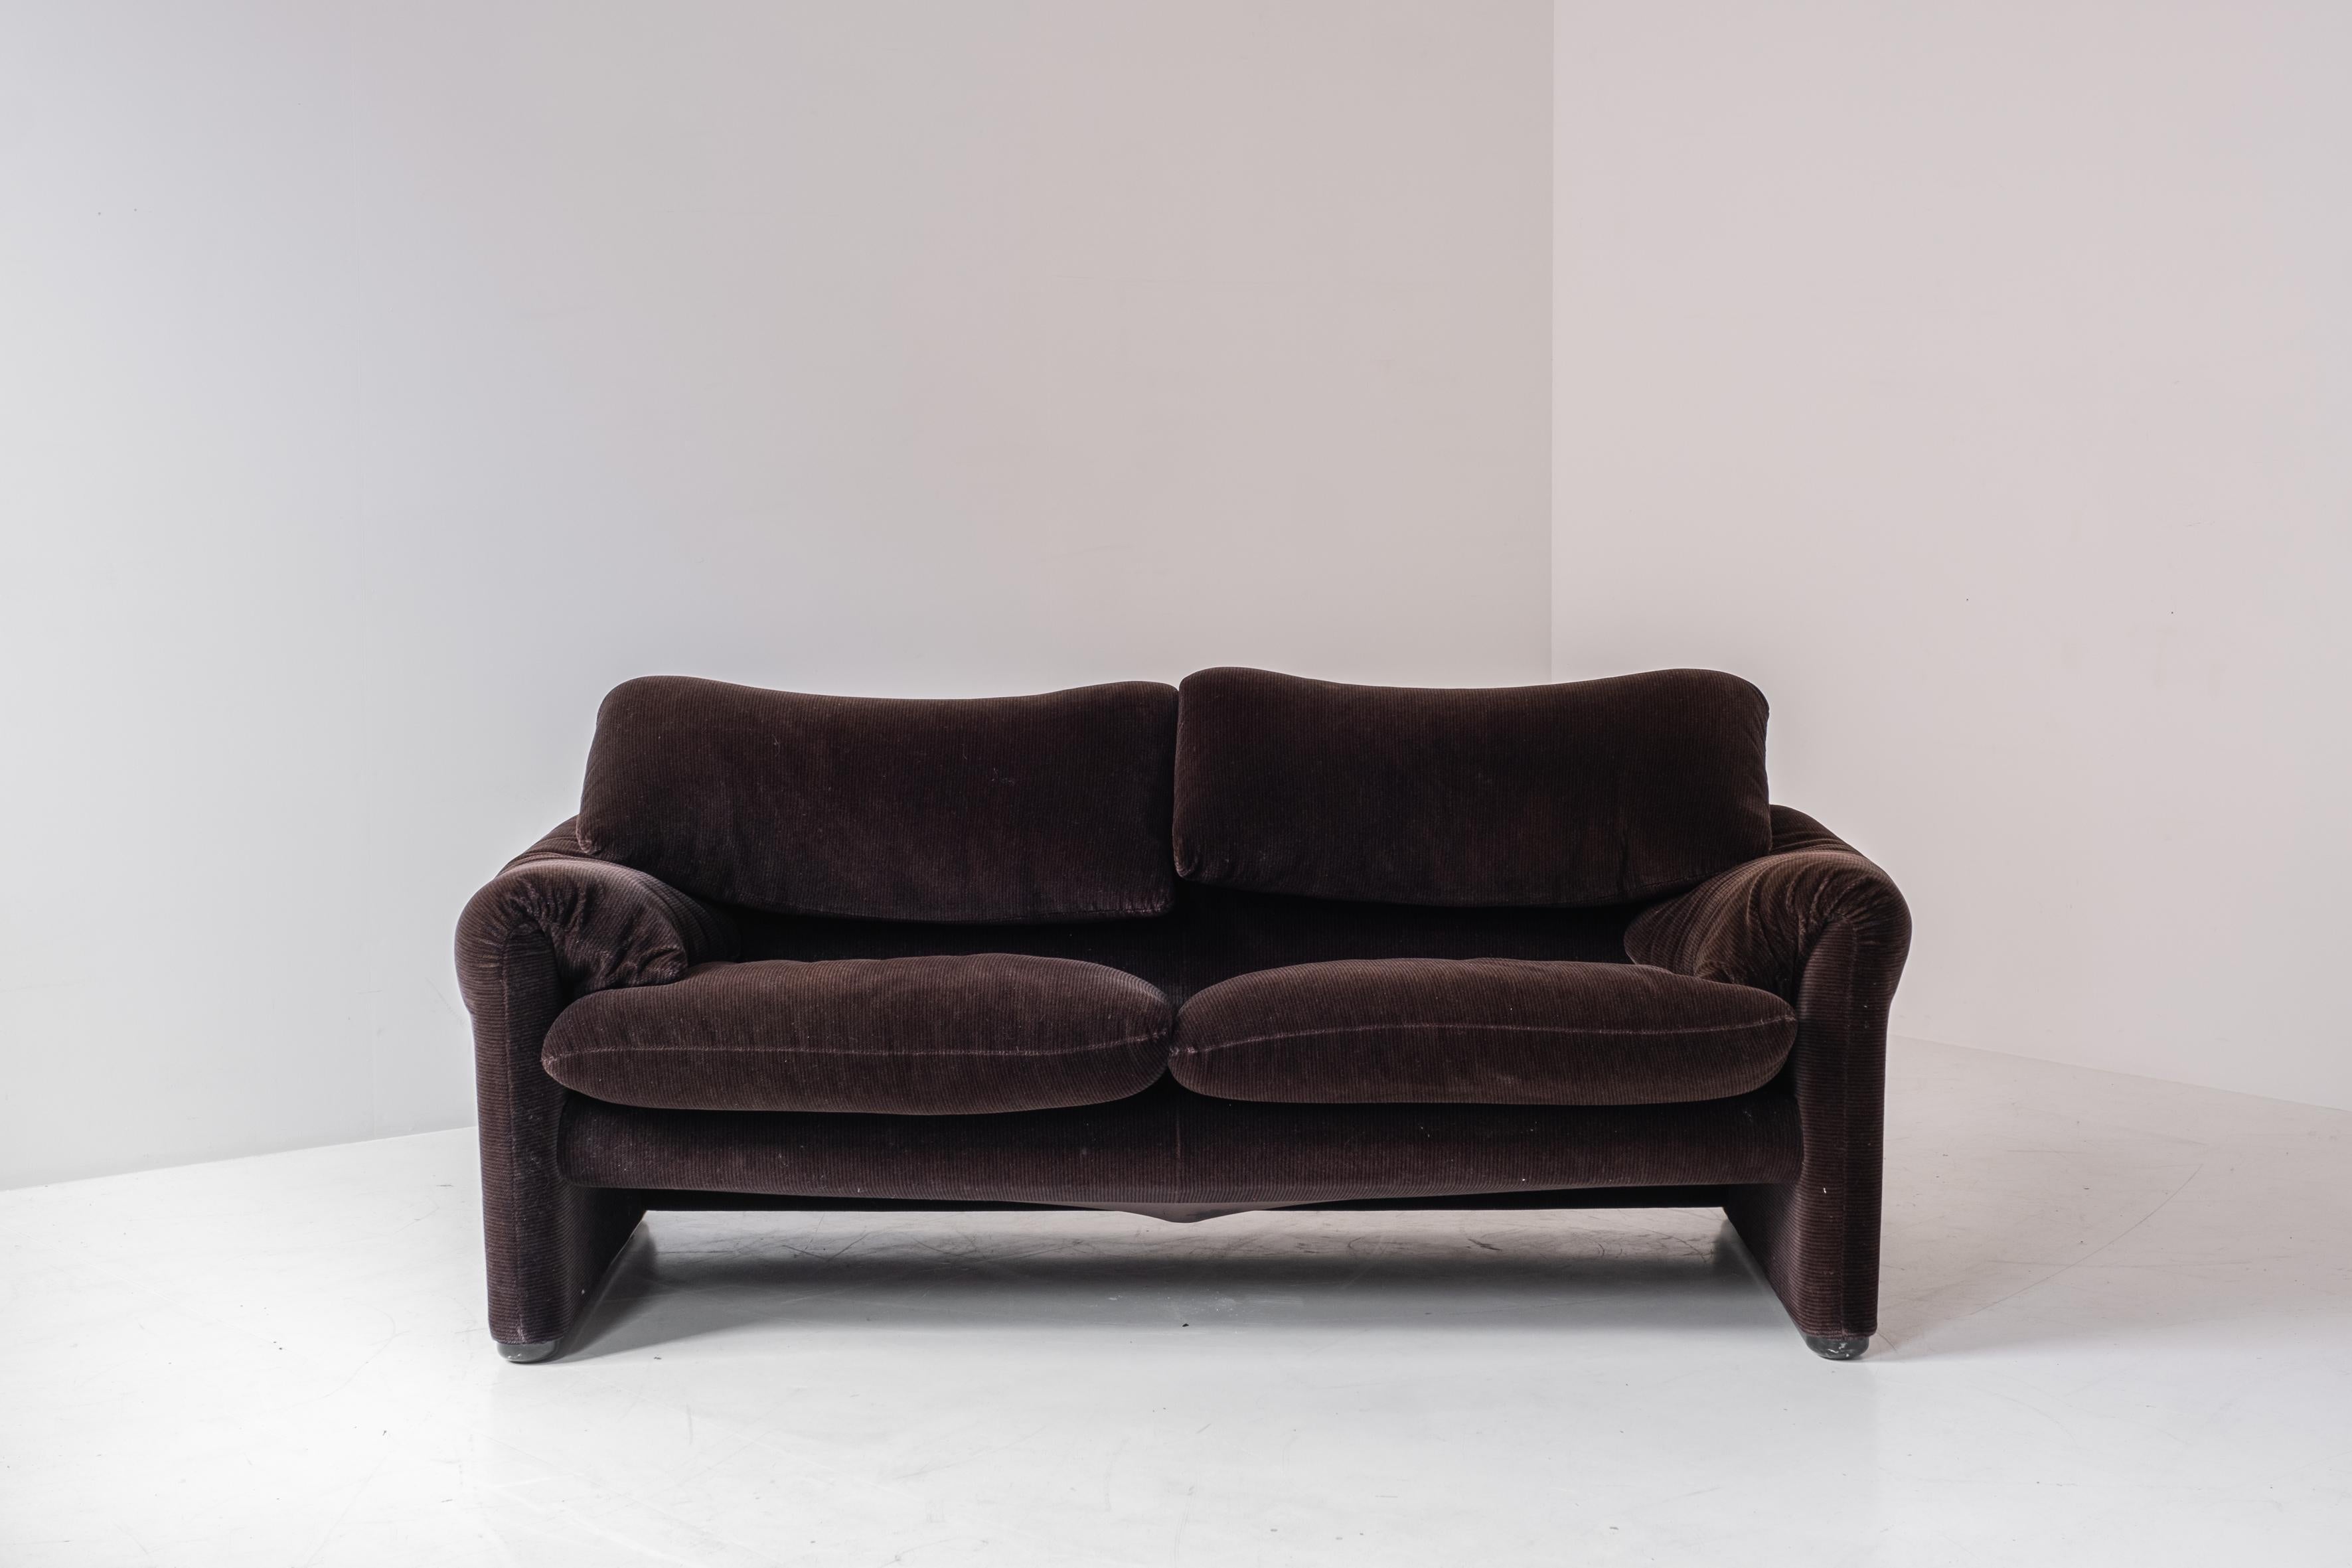 Maralunga two-seater by Vico Magistretti for Cassina, Italy 1970s. This loveseat features the original velvet upholstery and still remains in a very well presented condition. This sofa has an adjustable backrest, providing great comfort in both